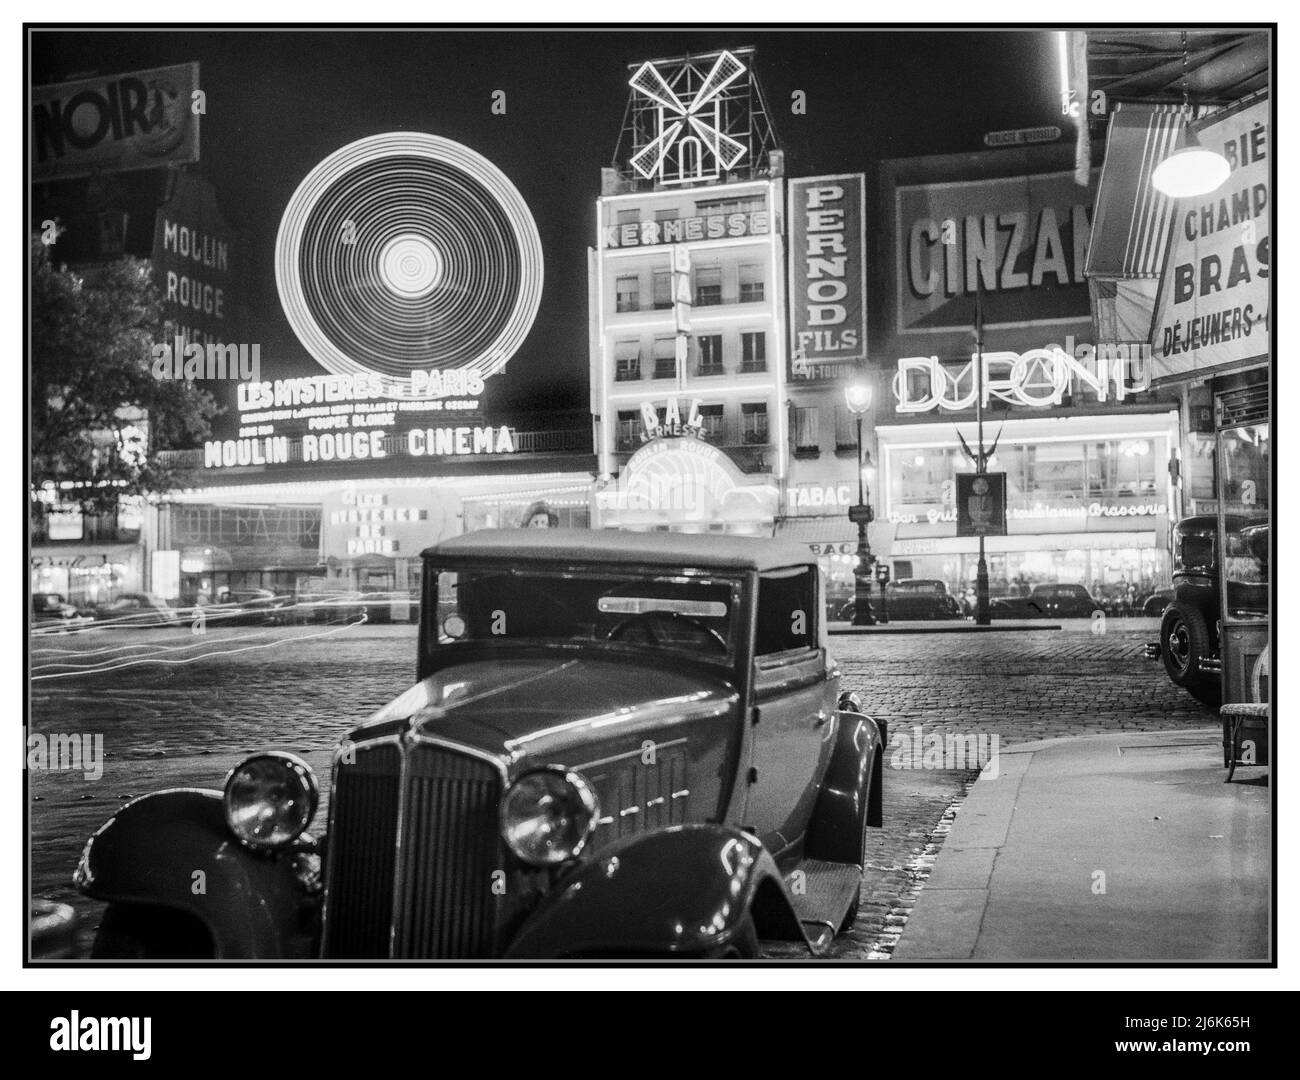 MOULIN ROUGE Retro Vintage Paris night lights advertising neon B&W The Moulin Rouge Montmartre Paris France at night 1936: 2 door coupe car in foreground, French drinks alcohol advertising hoardings France, Paris Moulin Rouge Photographer :  Willem van de Poll Stock Photo